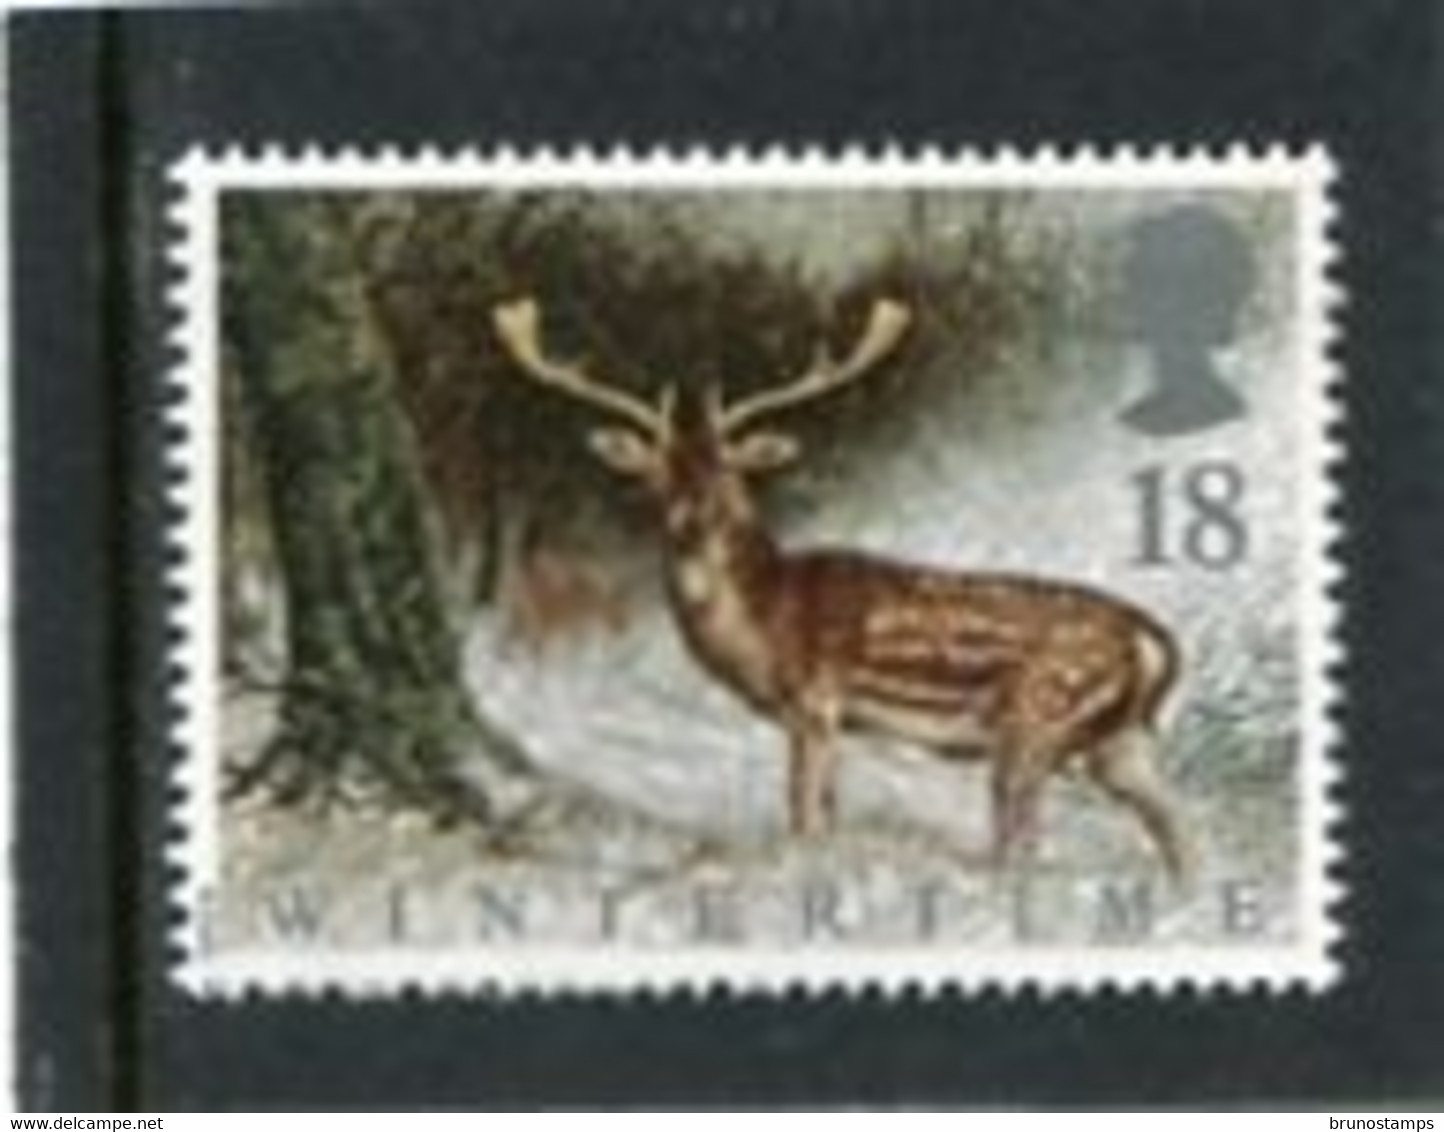 GREAT BRITAIN - 1992  18p  WINTER  MINT NH - Unclassified